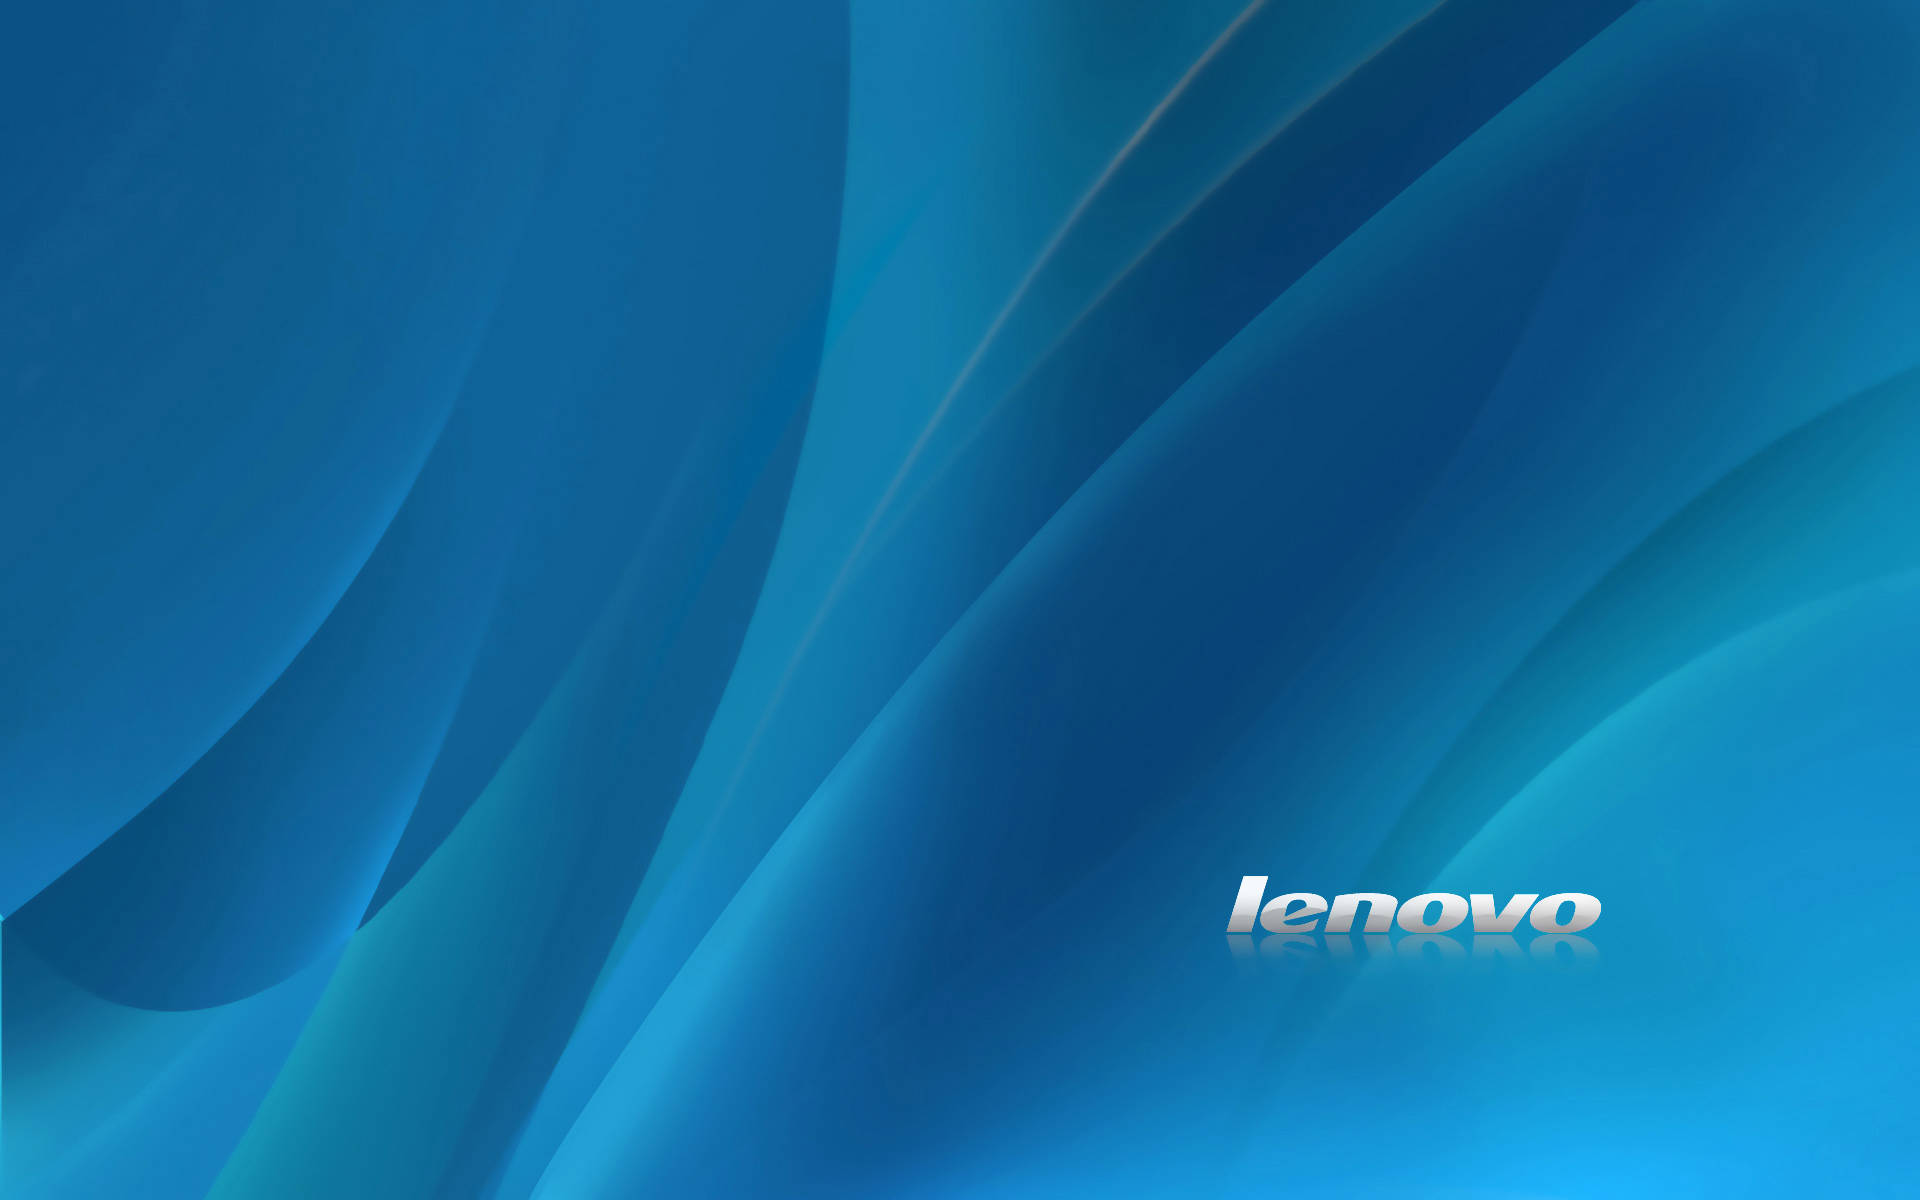 Lovely Lenovo Laptop Wallpapers Free Download Hd | Lenovo wallpapers,  Laptop wallpaper, Hd wallpapers for laptop